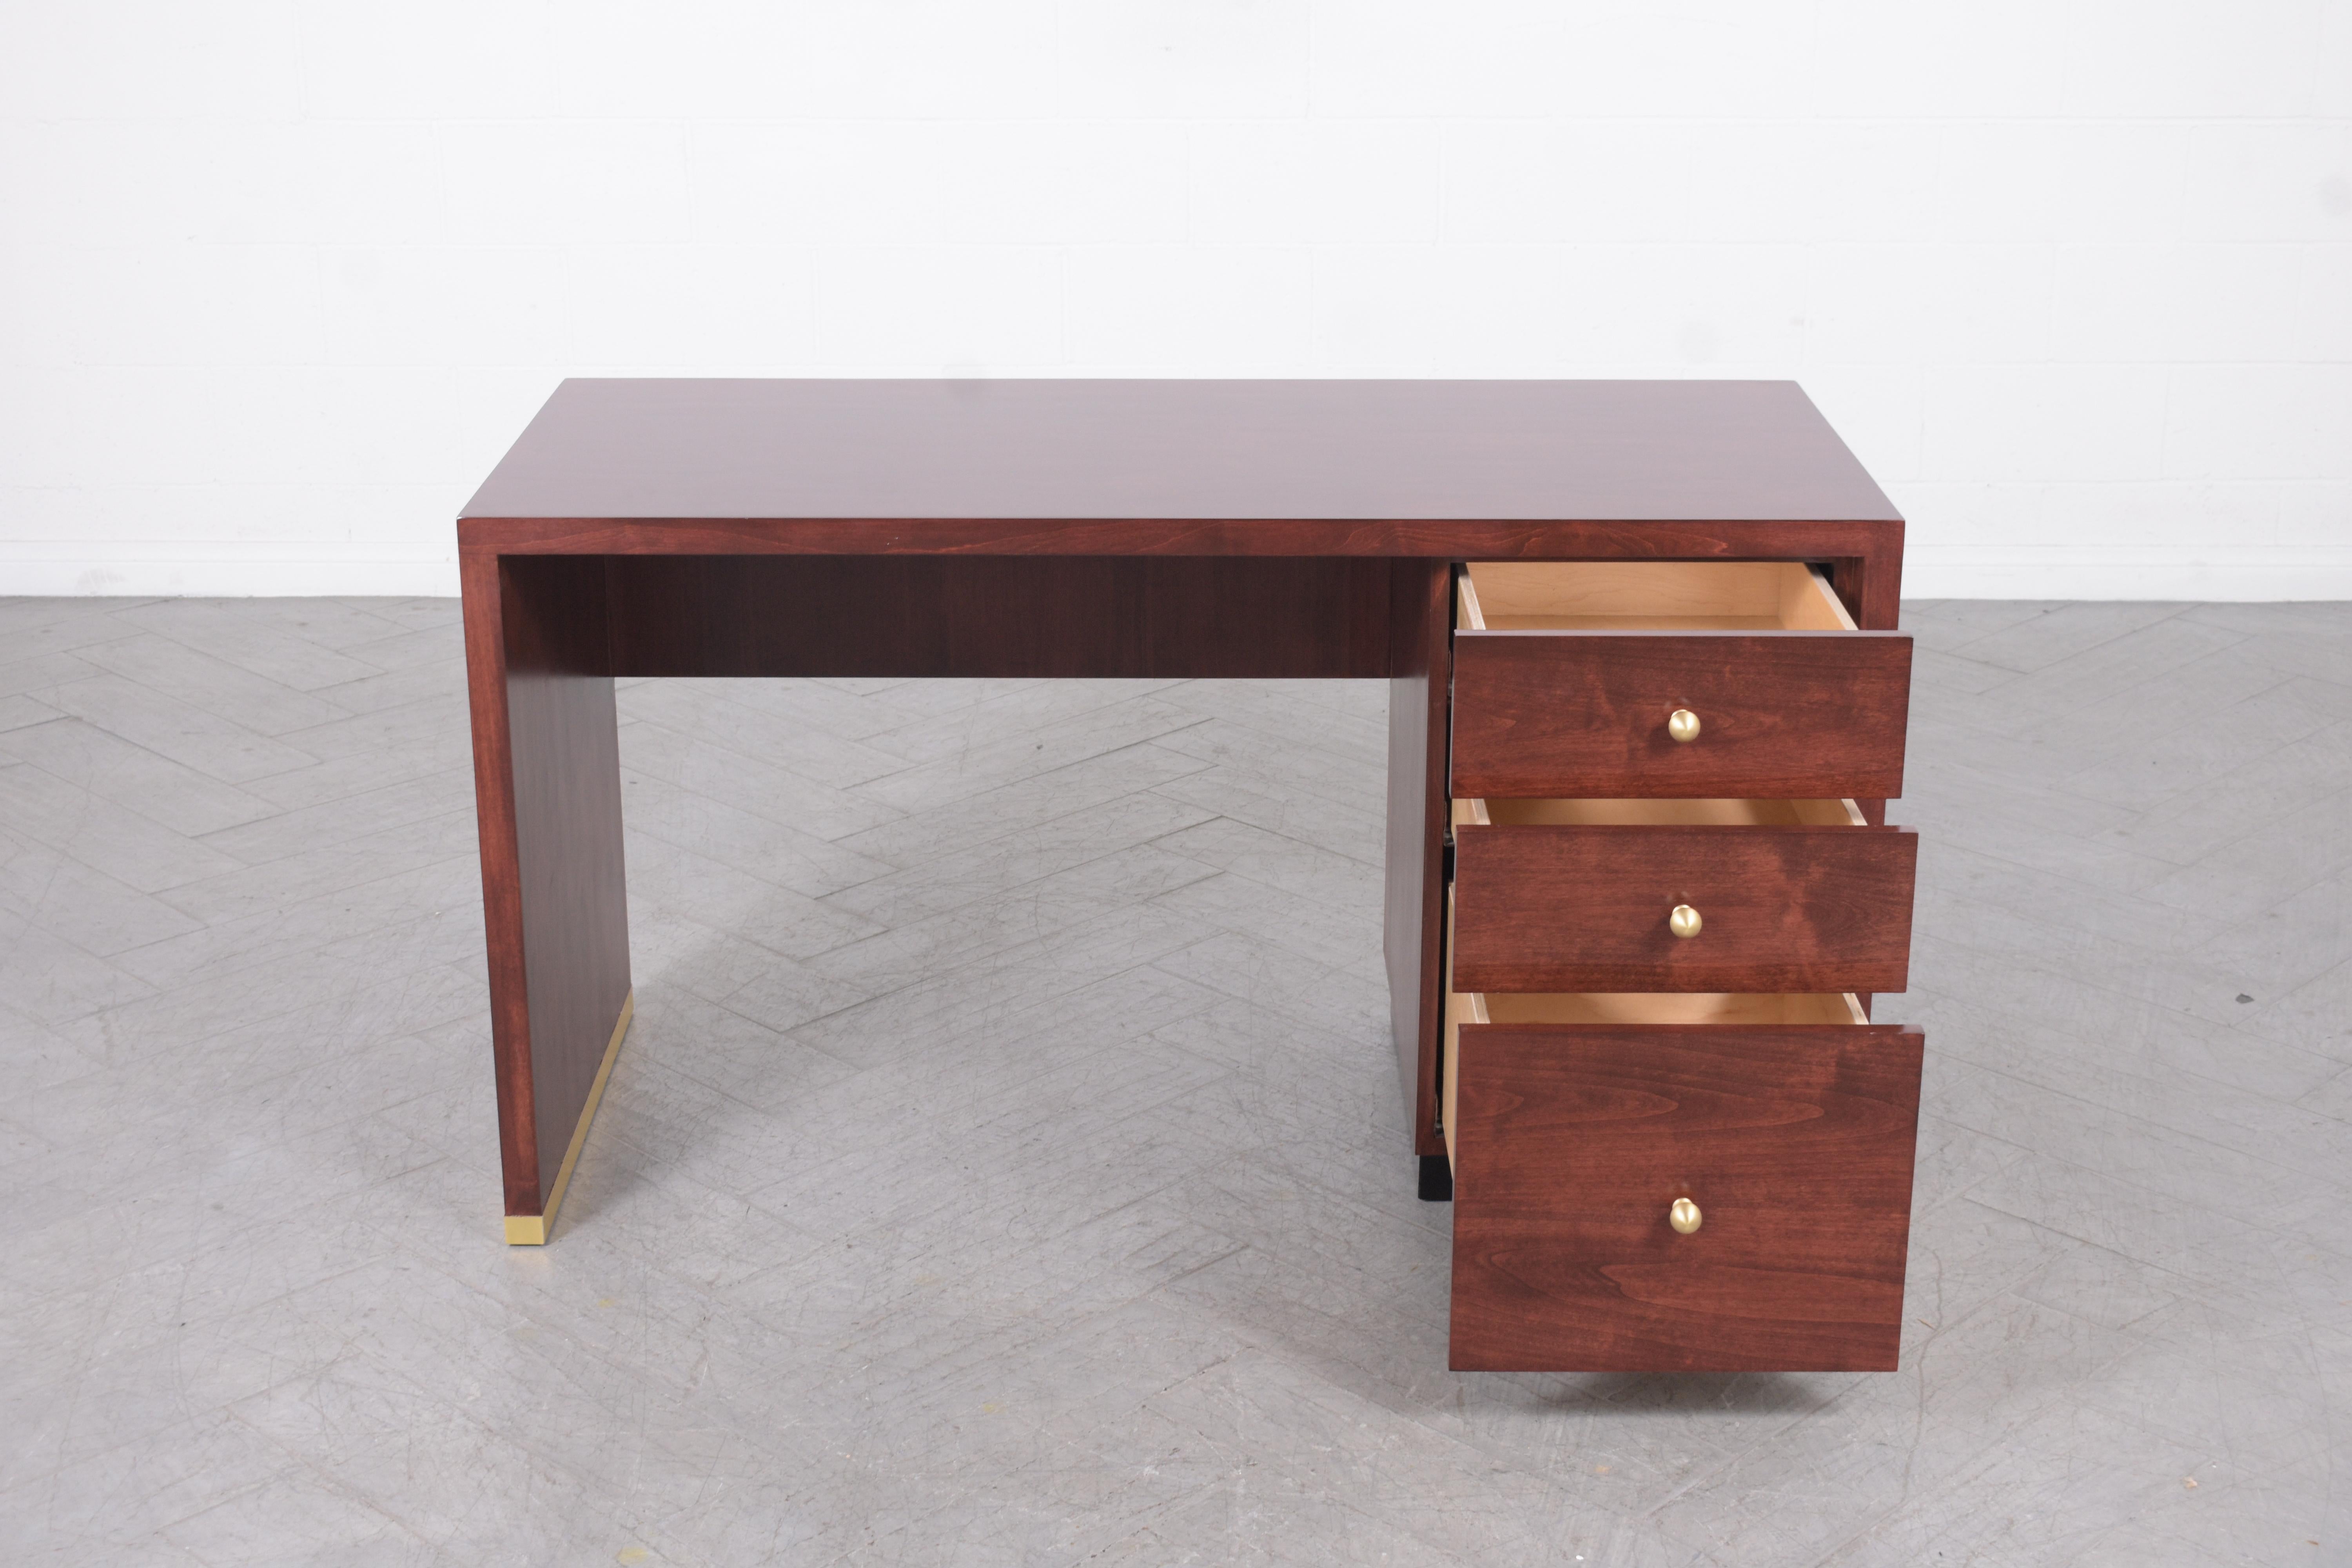 Hand-Crafted 1970s Vintage Mid-Century Modern Mahogany Desk: Timeless Elegance & Quality For Sale